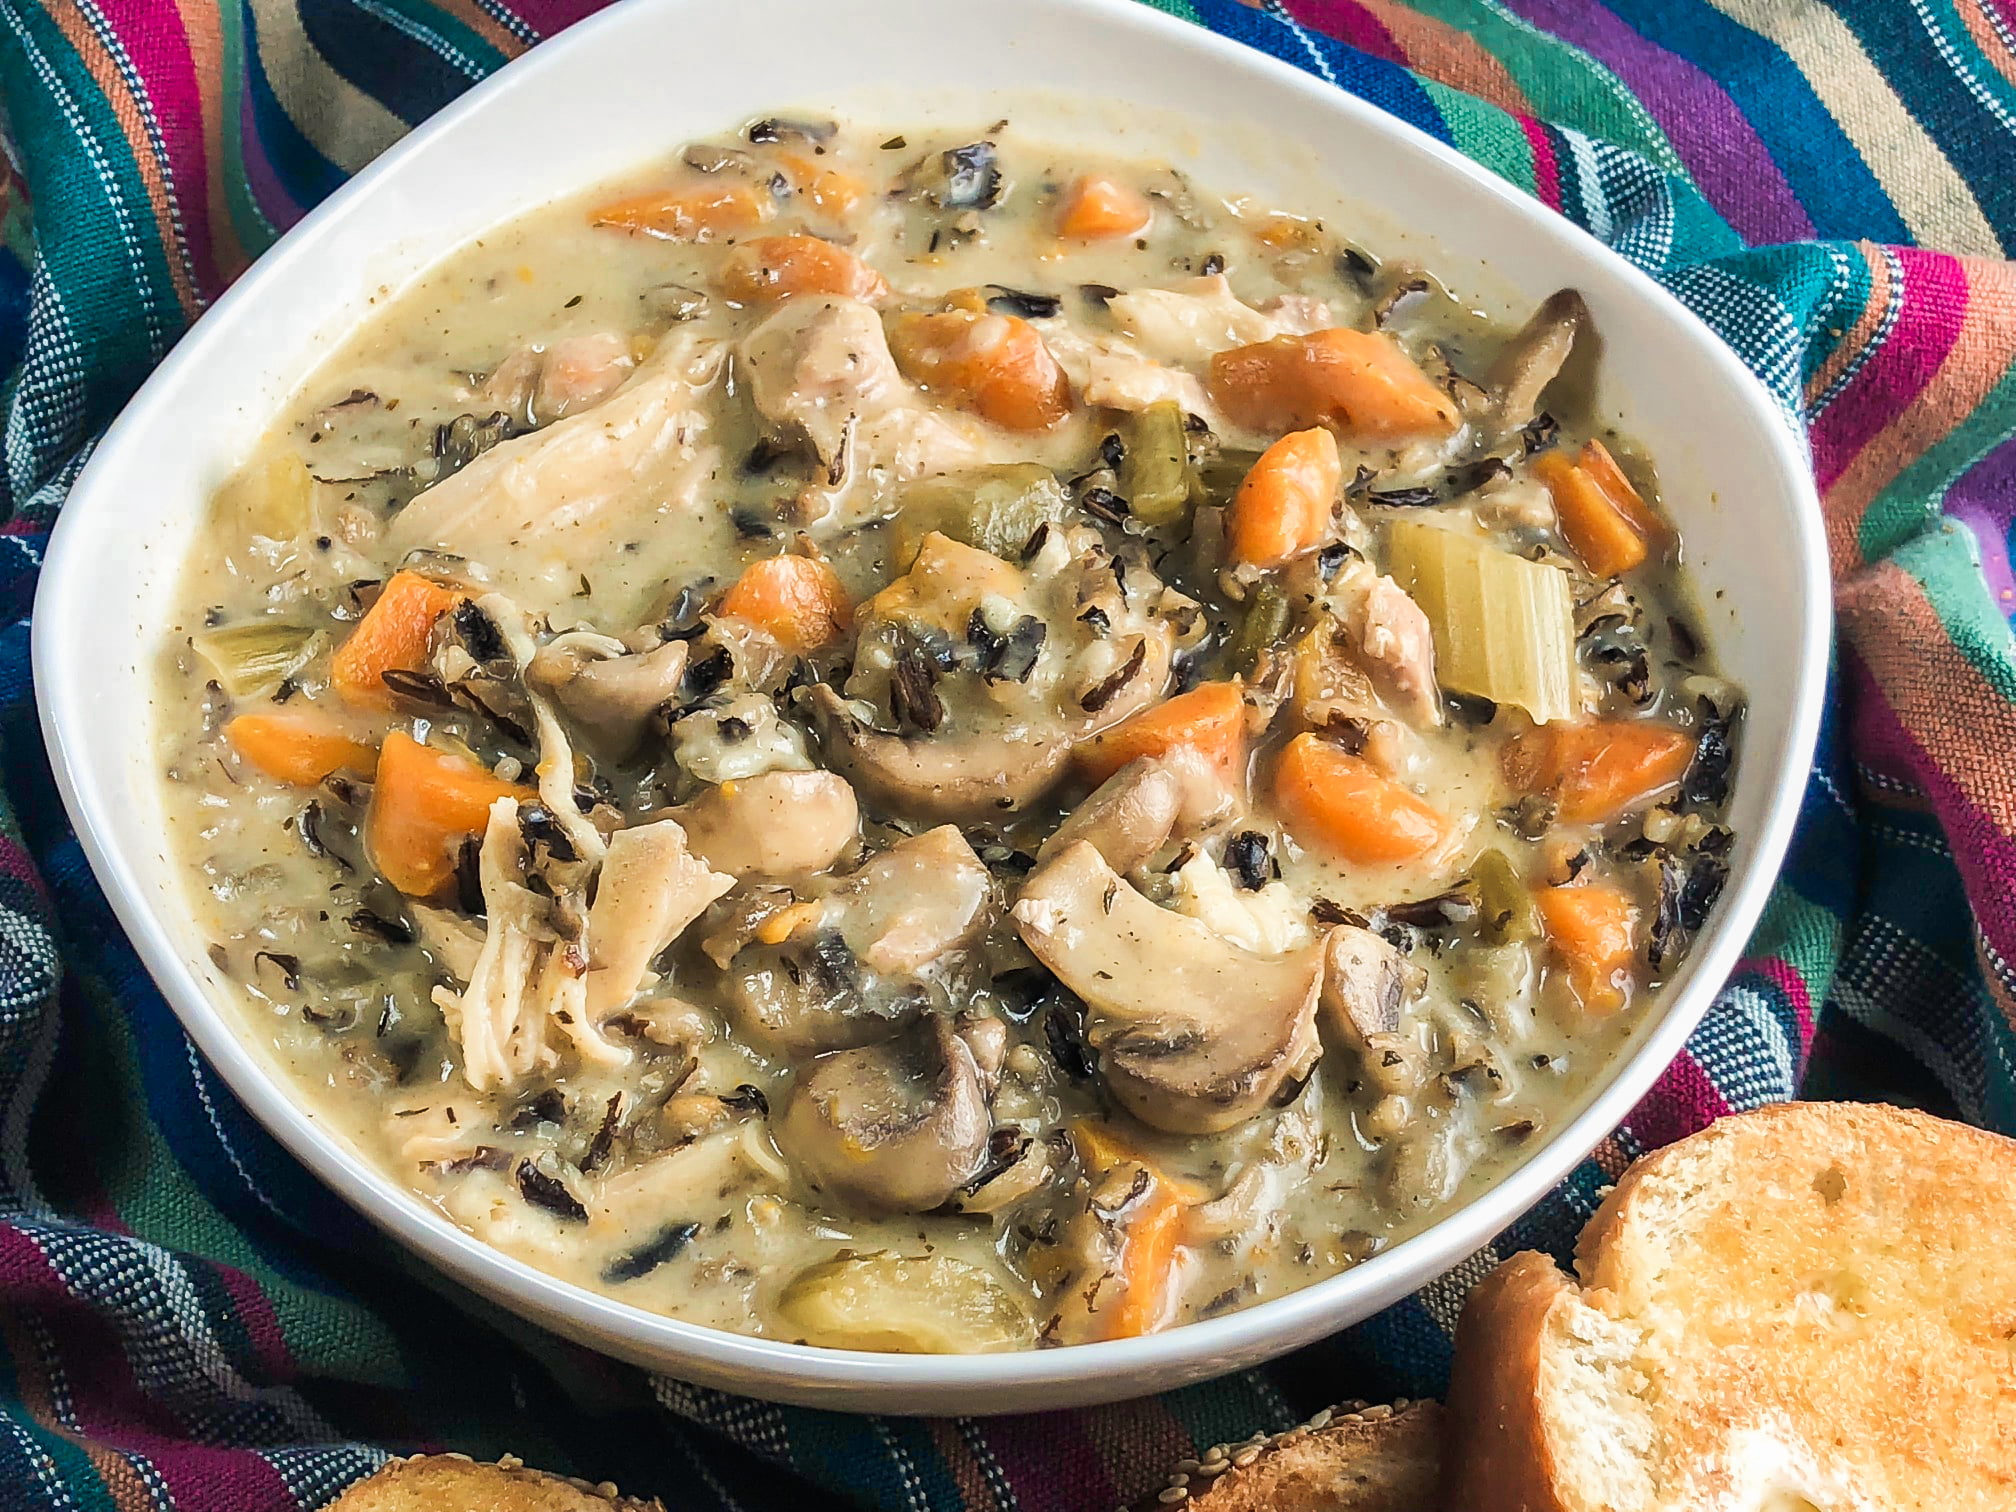 A large bowl filled to the brim with chicken and wild rice soup.